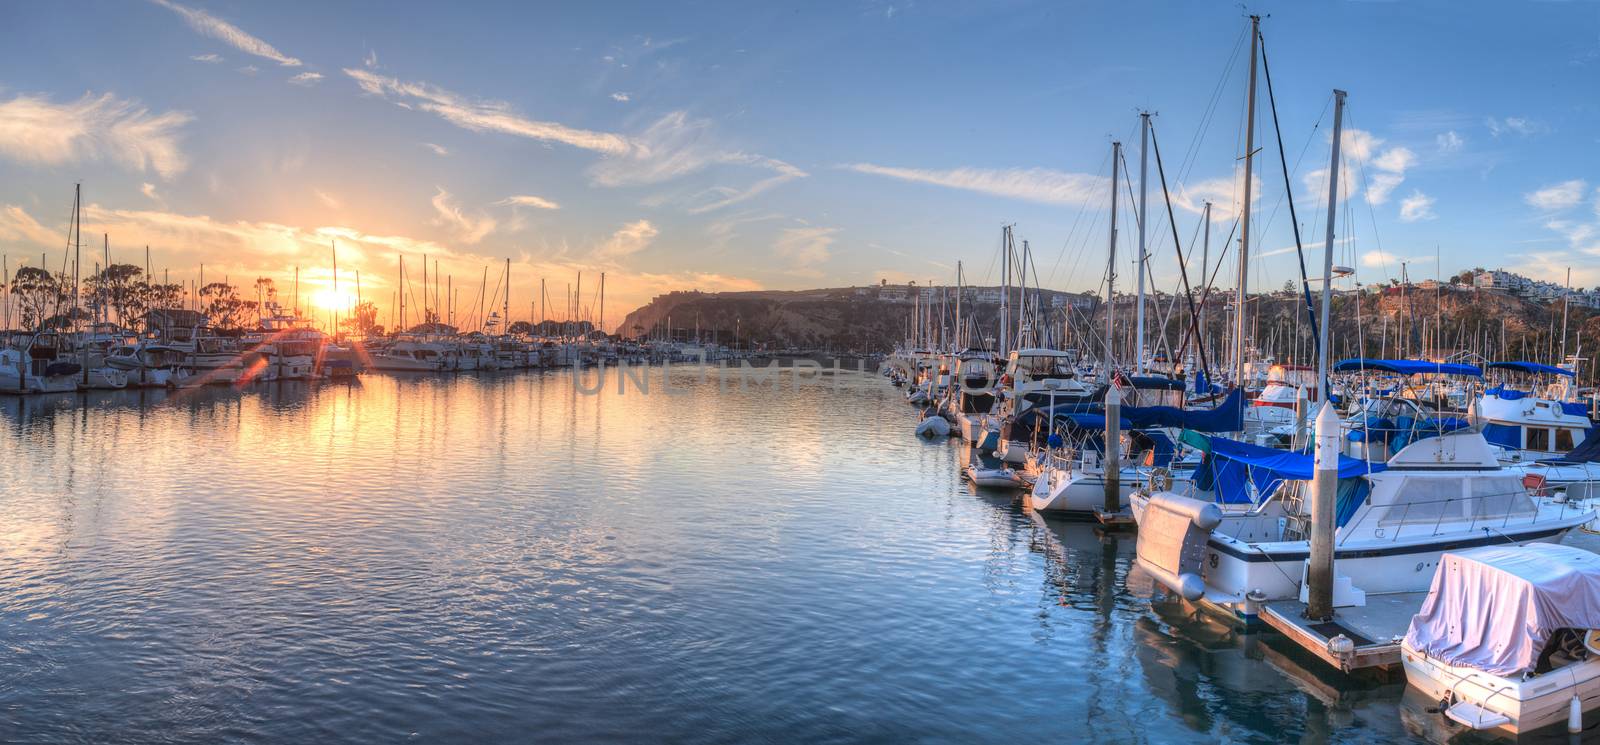 Sunset over sailboats in Dana Point harbor by steffstarr